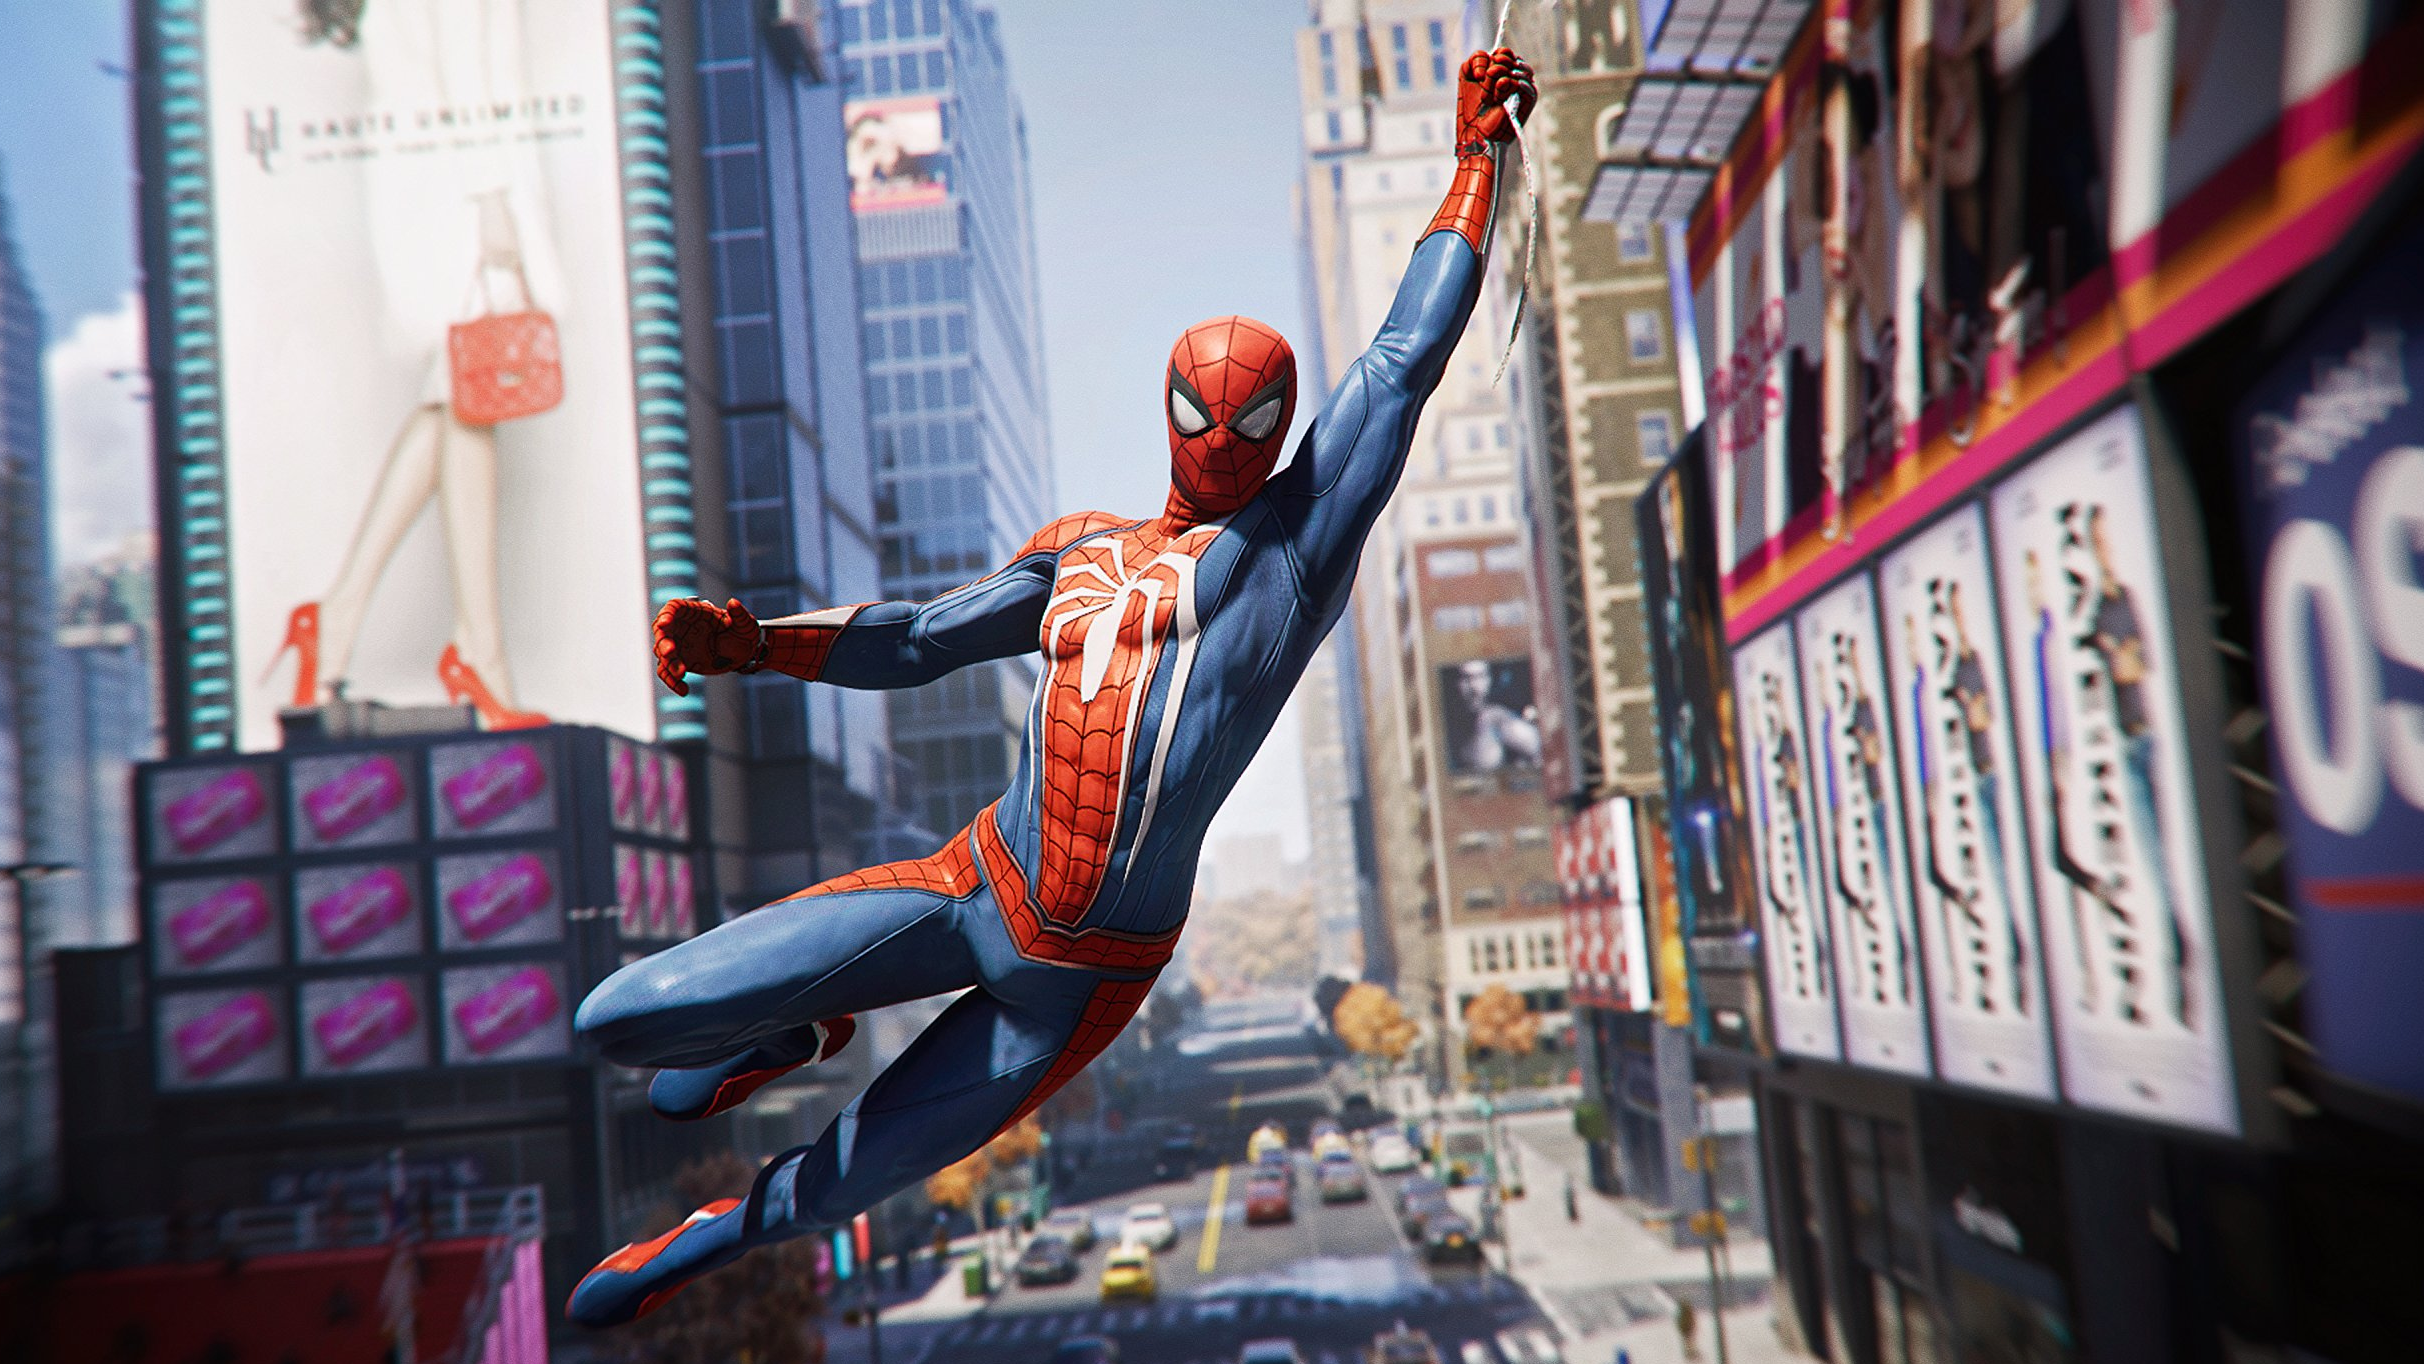 Insomniac defends making its Spider-Man No Way Home DLC suits PS5